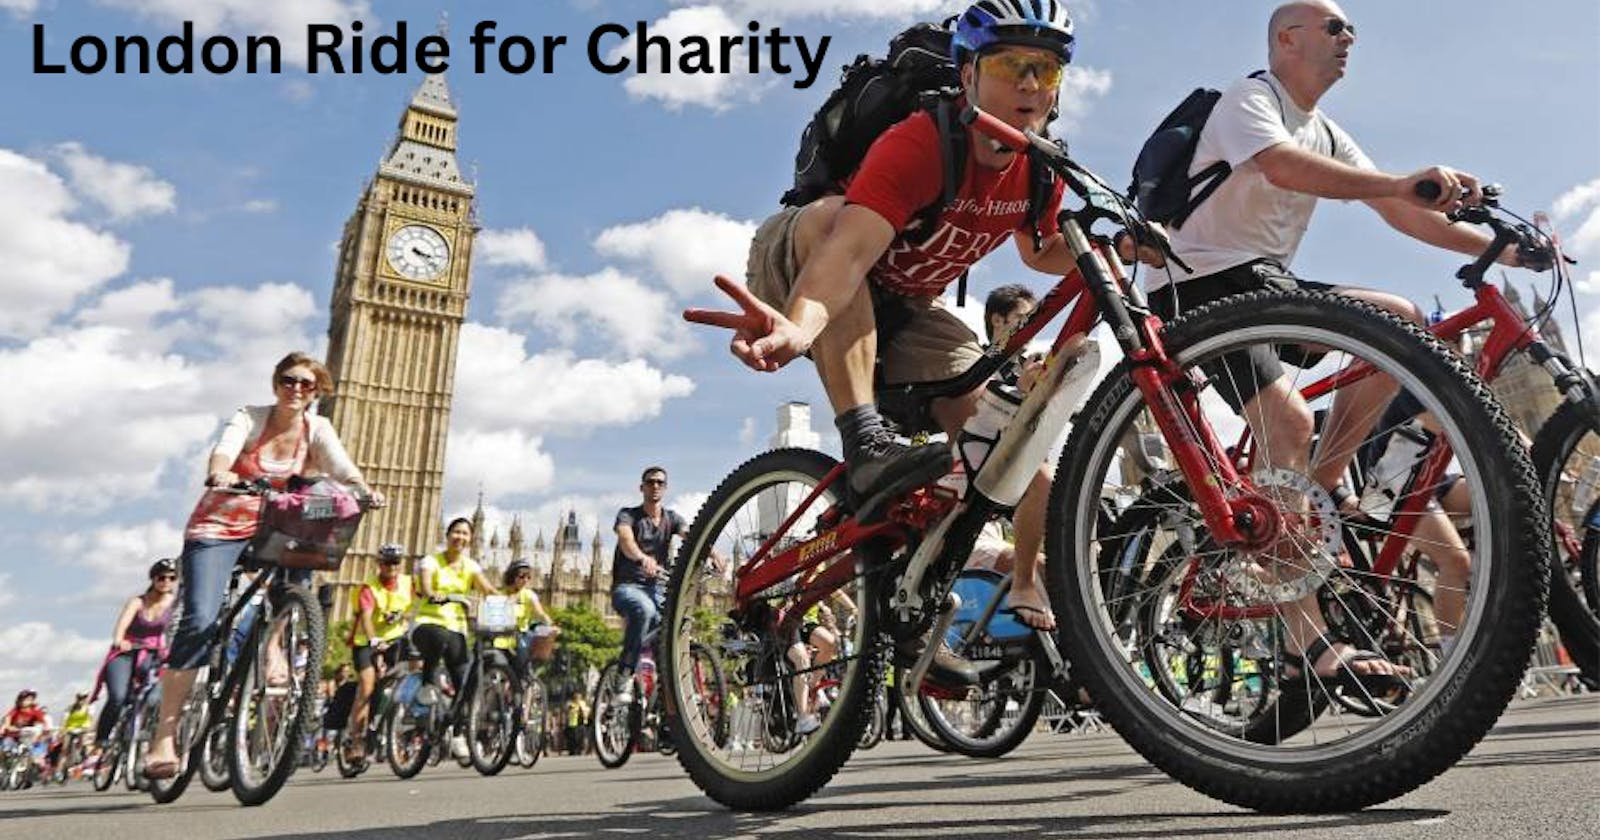 Participate in Charity ride event to raise funds